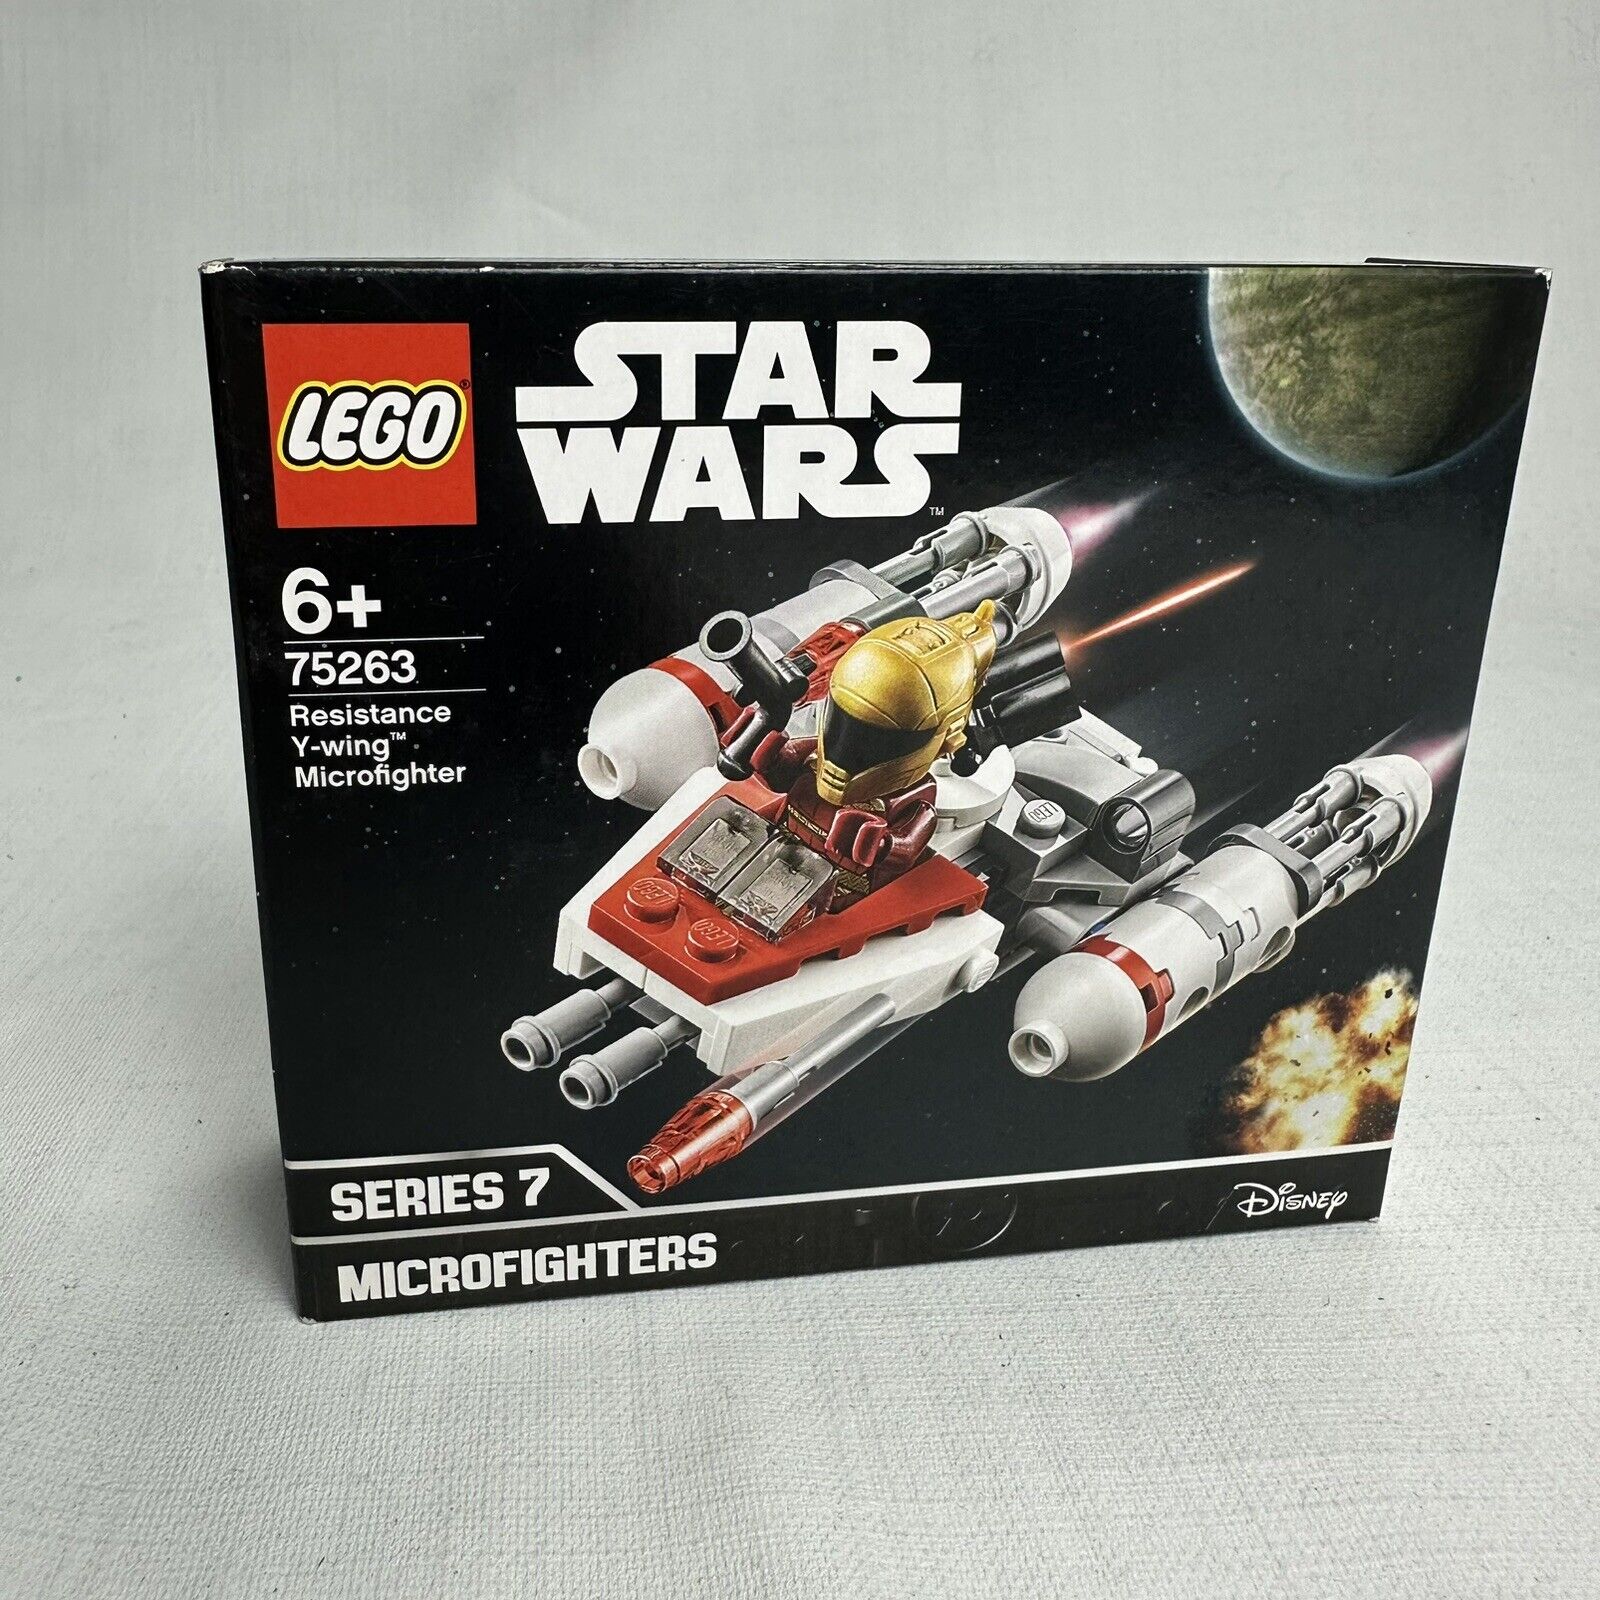 LEGO Star Wars Microfighter Series 7 75263 Resistance Y-Wing Zorii Bliss